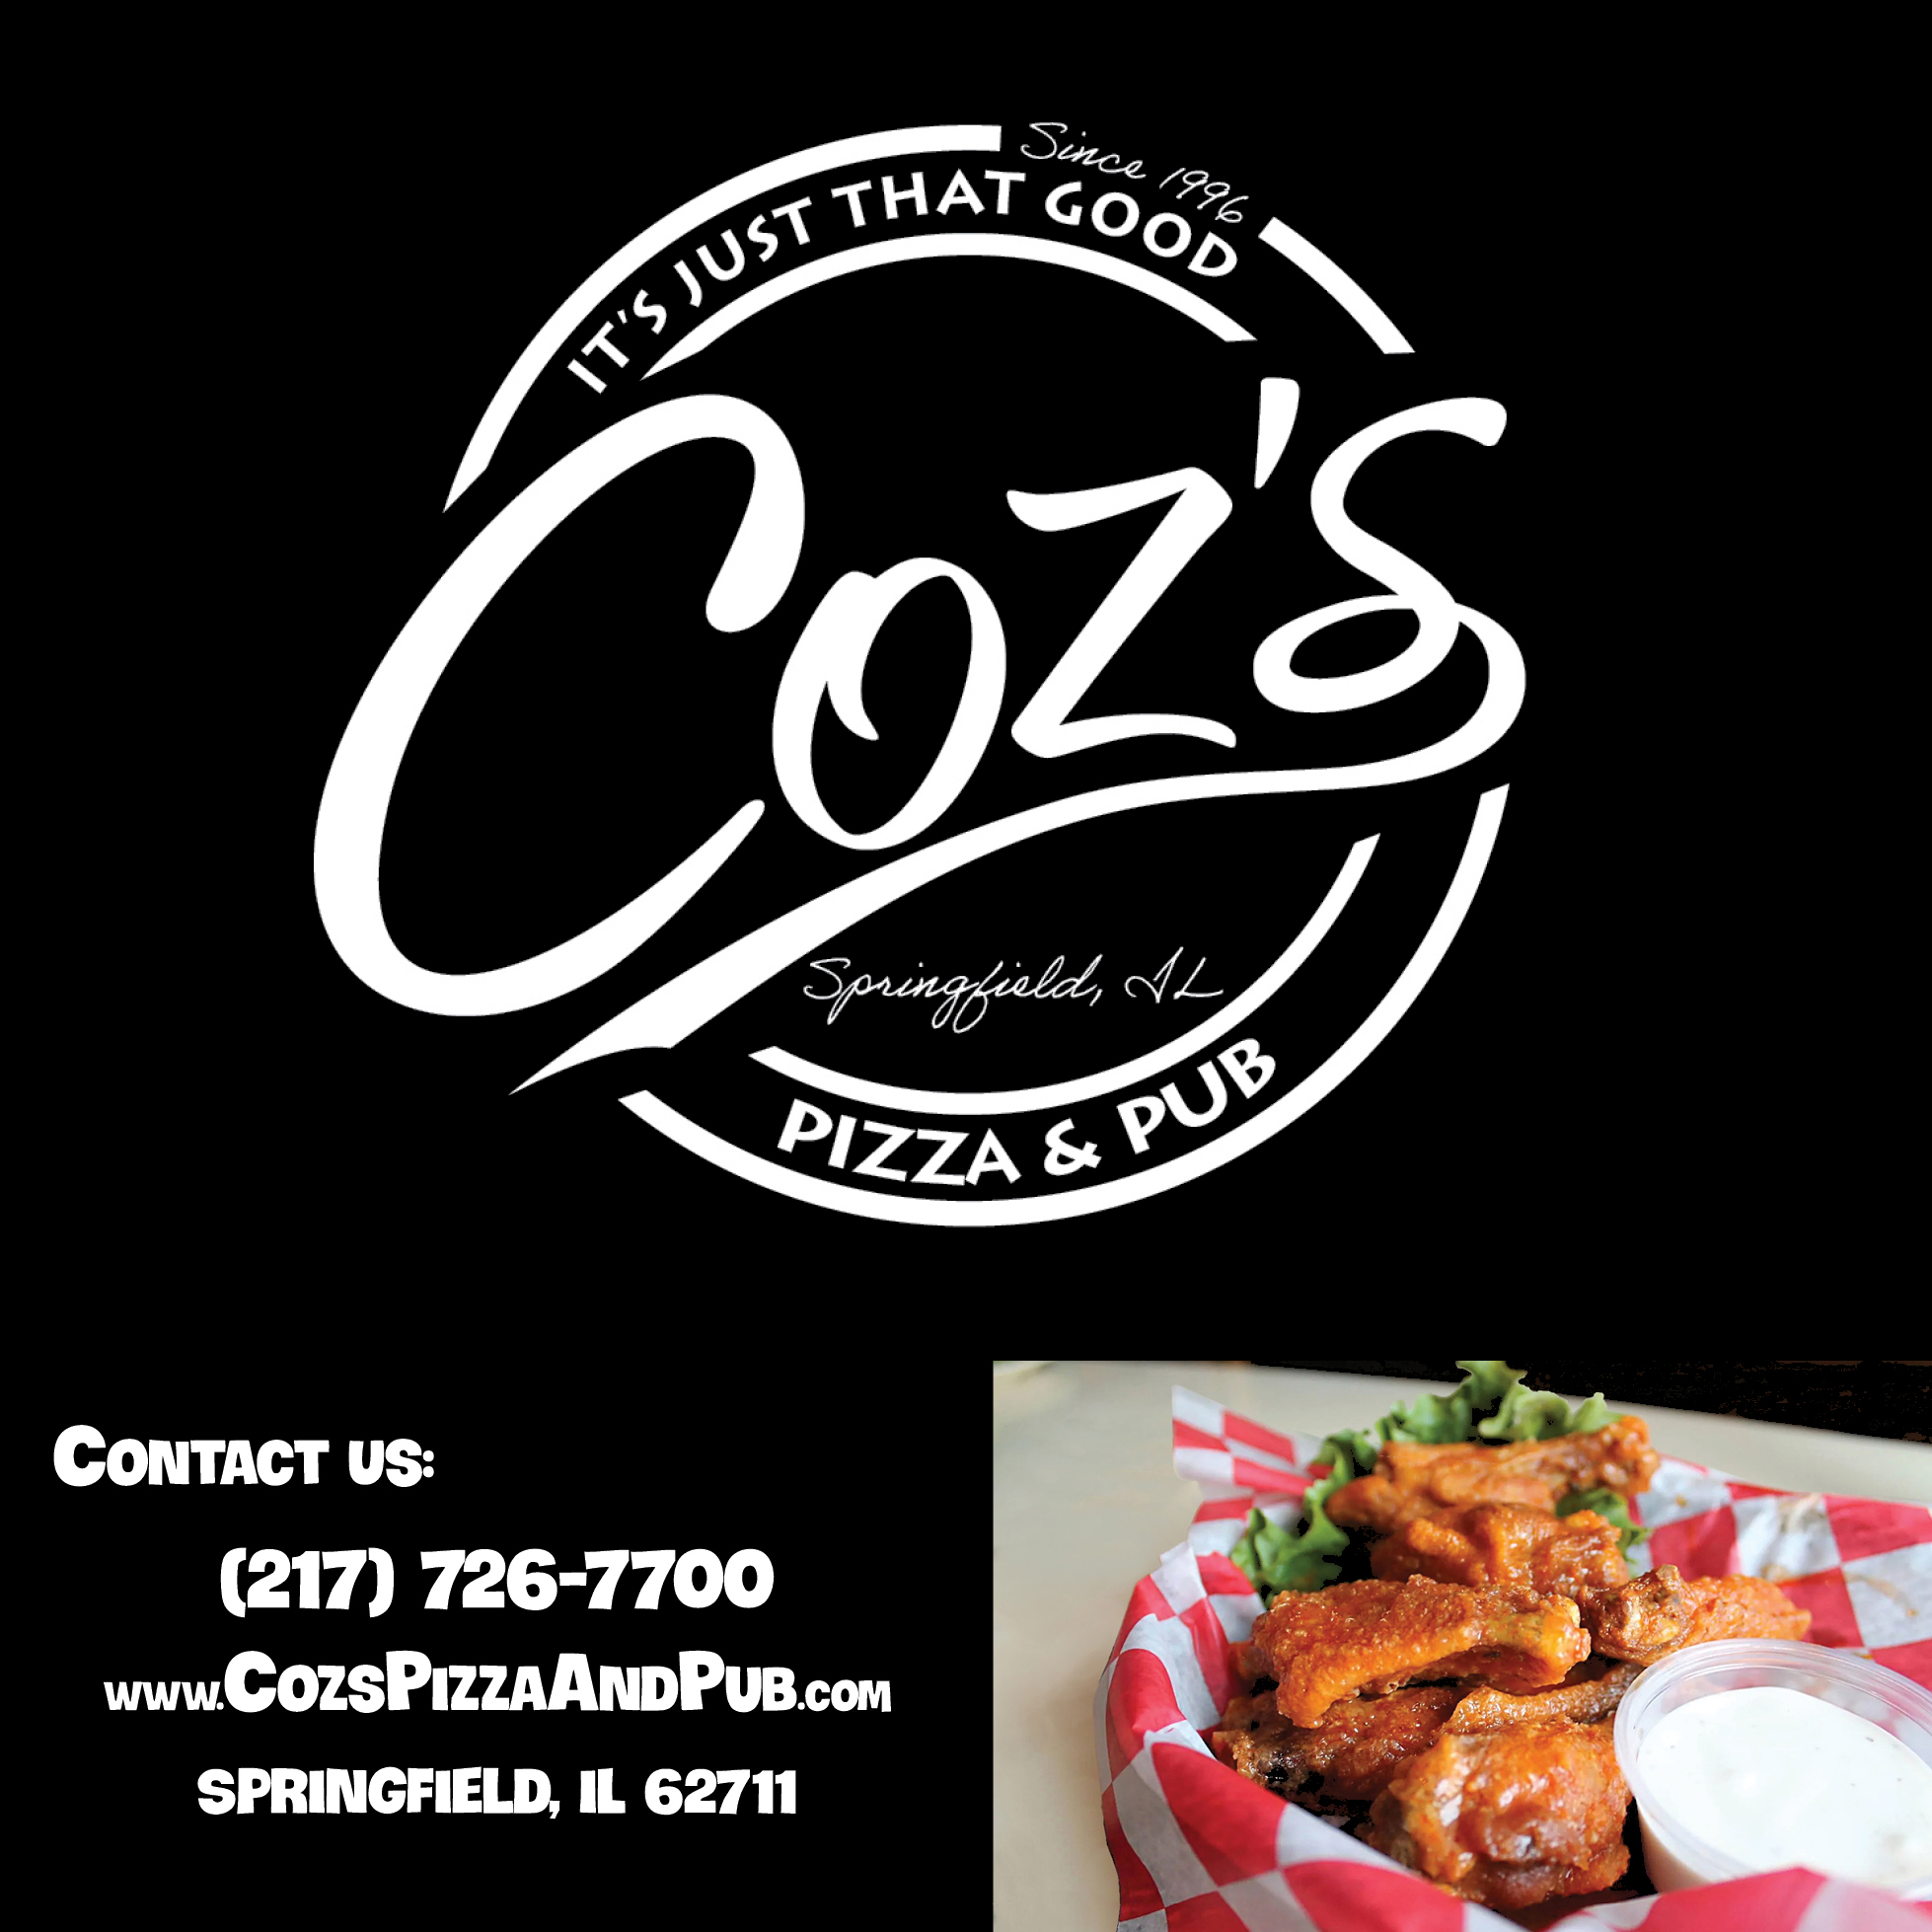 An ad for Coz's Pizza & Pub, Springfield, Illinois, serving Italian cuisine & Pub food, Pizza, Chicken Wings, Sandwiches, Fries, salads